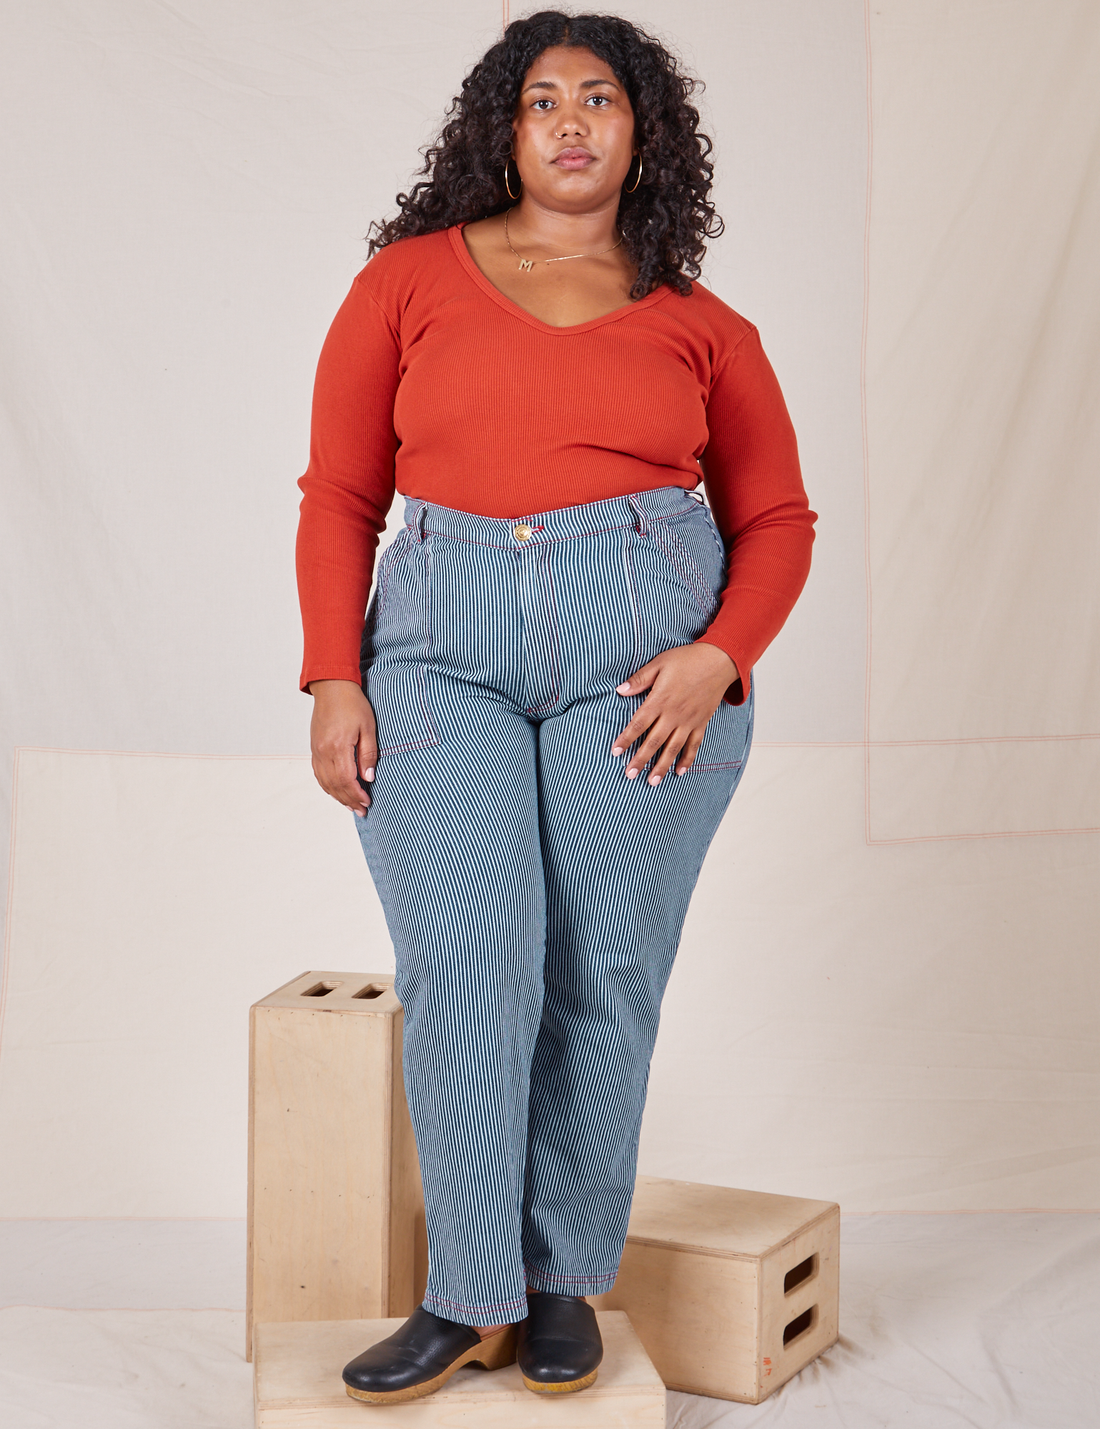 Morgan is 5'5" and wearing 1XL Railroad Stripe Denim Work Pants paired with a paprika Long Sleeve V-Neck Tee